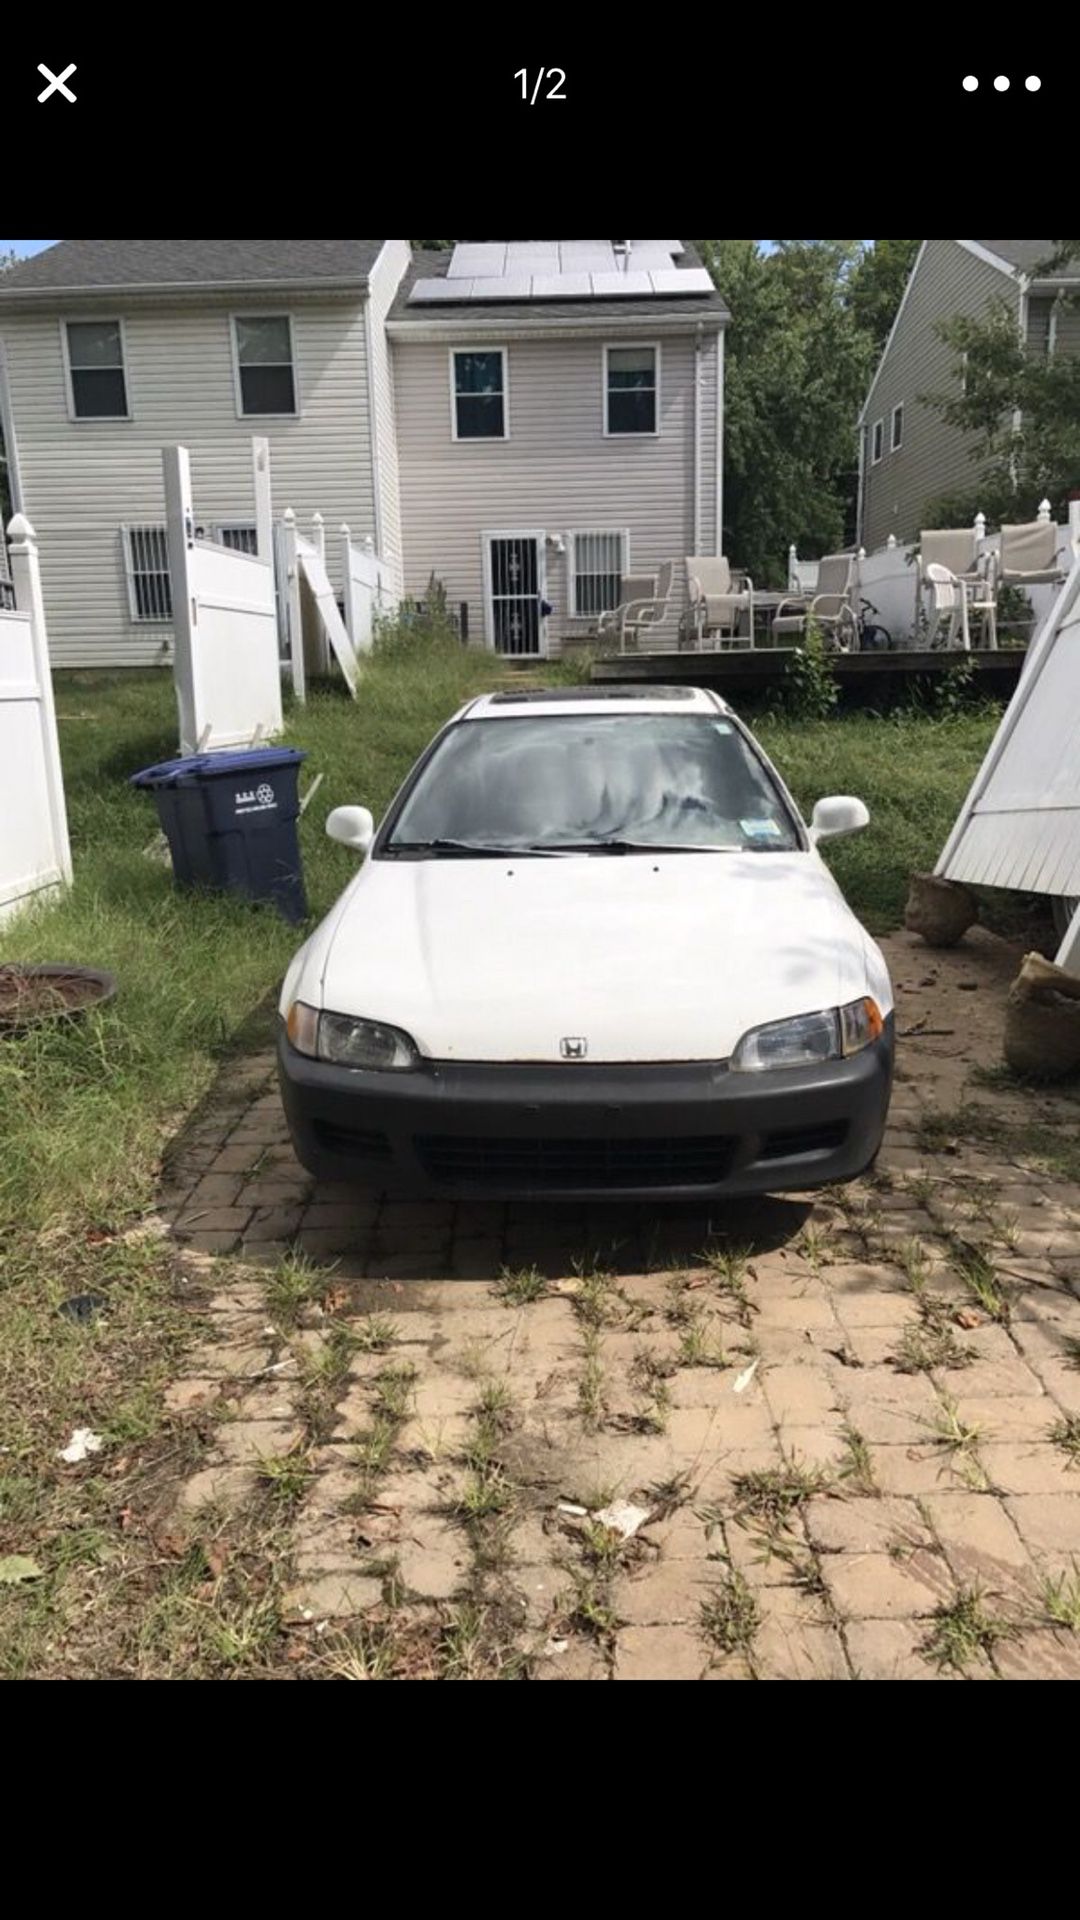 1999 Honda Civic it Ovreheats sometimes The mechanic says it’s the thermostat clean inside and out 114 thousand miles